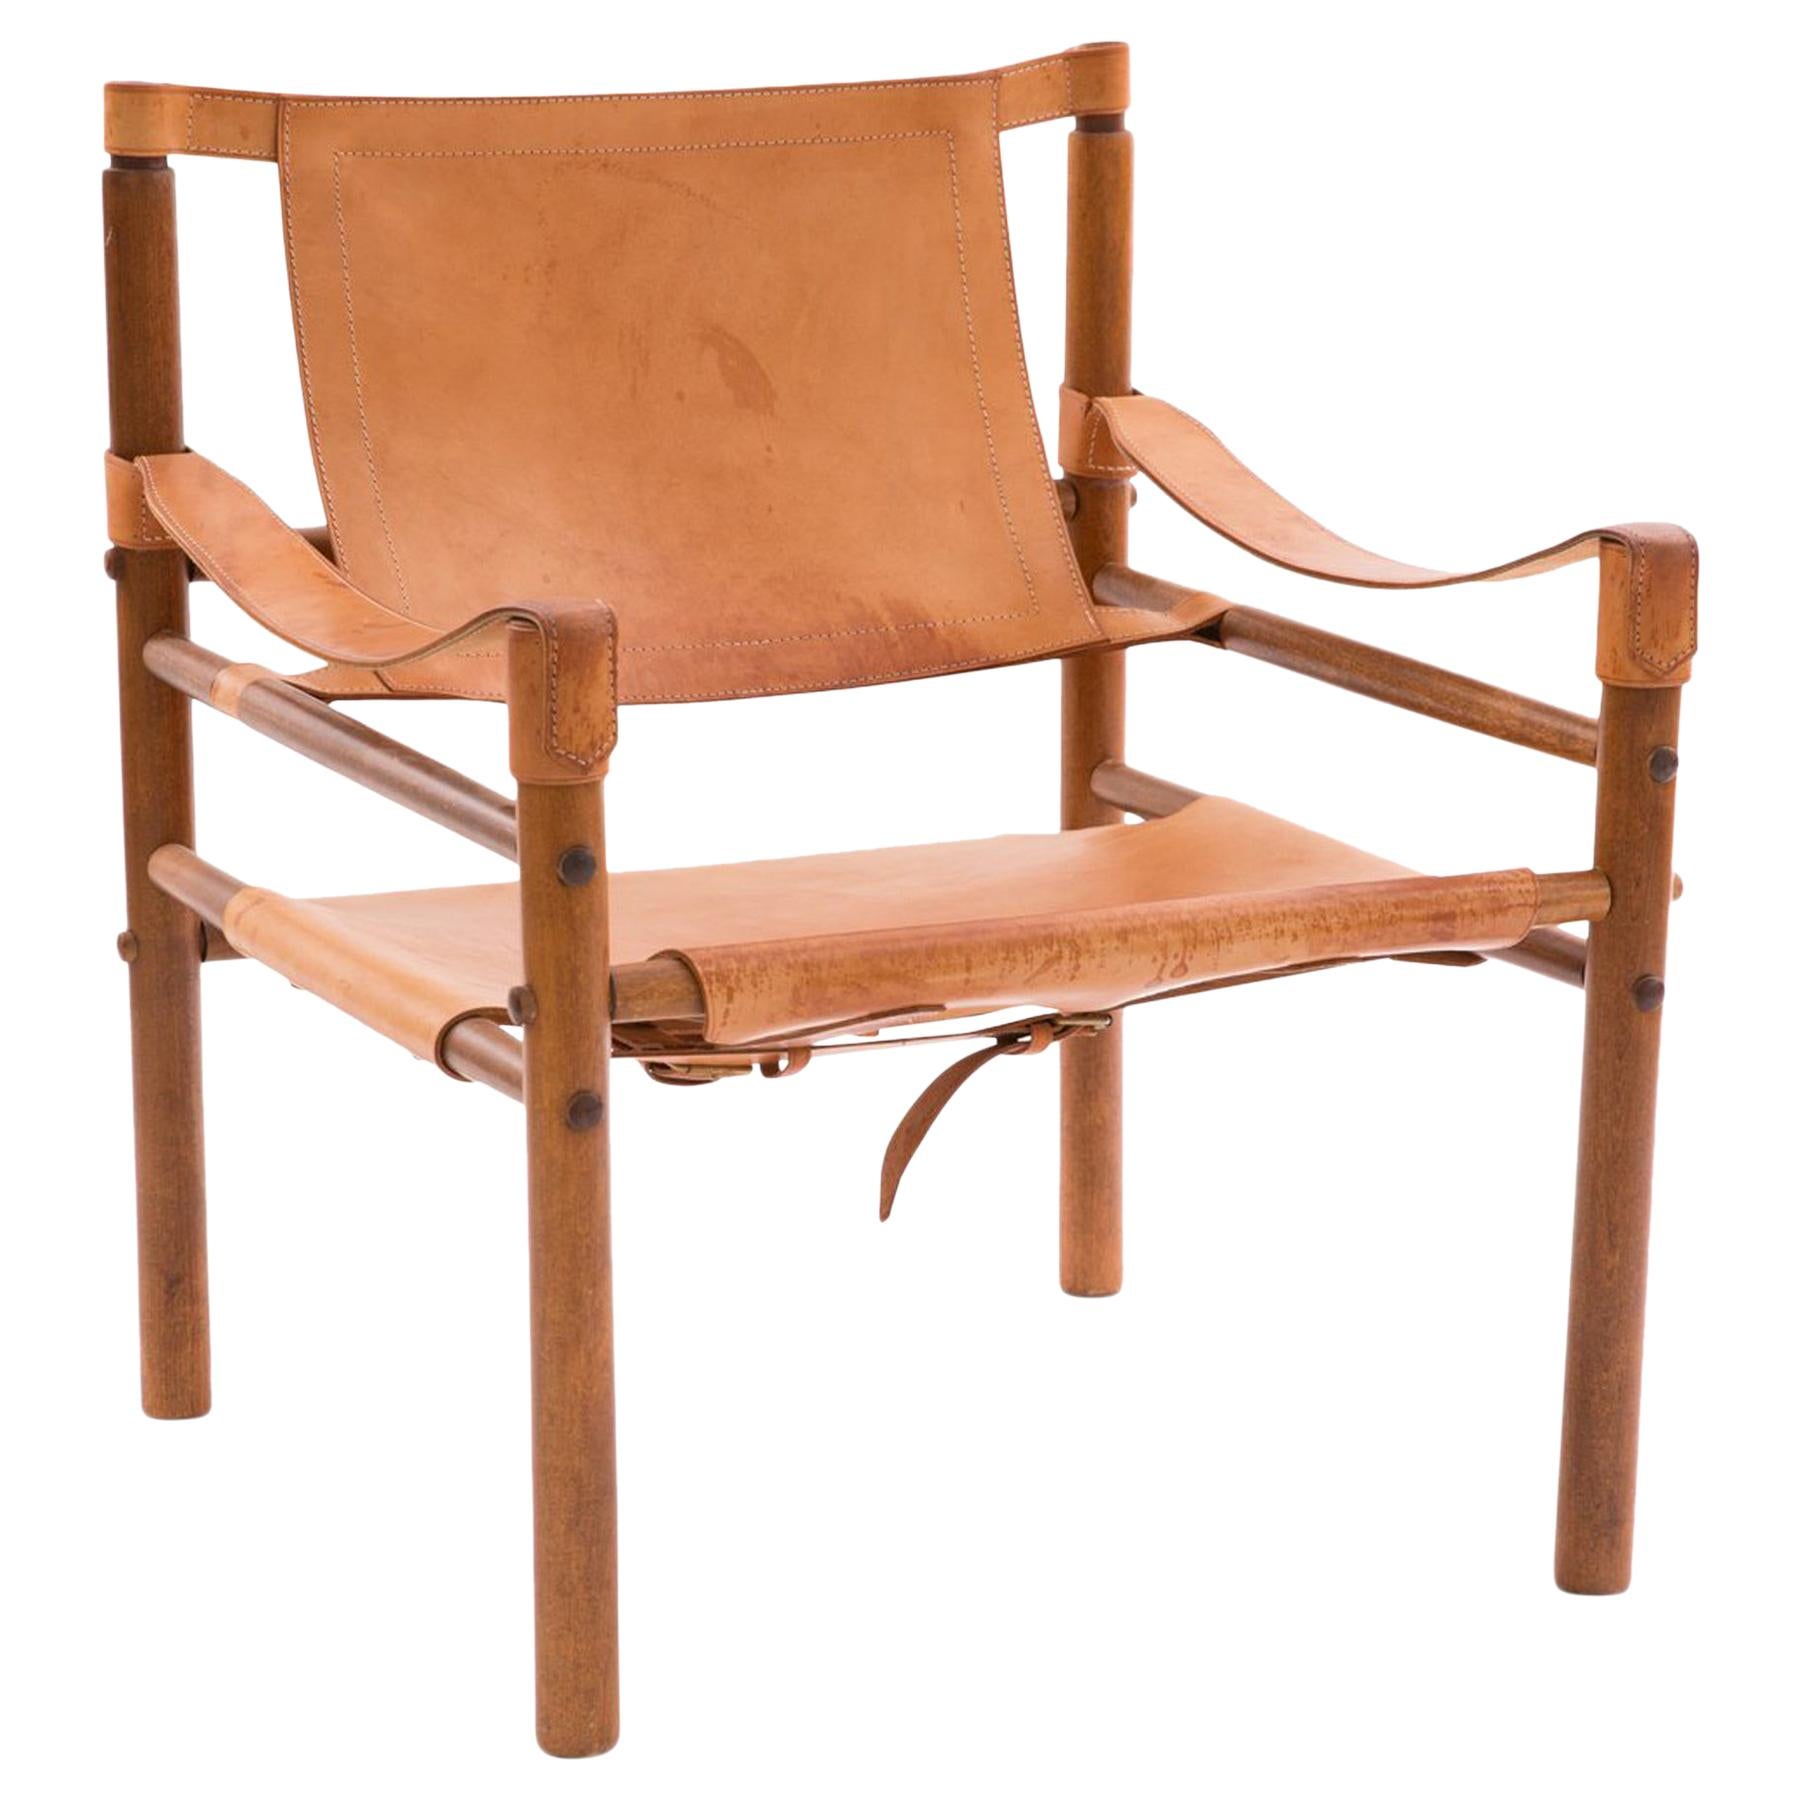 Arne Norell 1960s Safari Sling Chair in Tan Leather